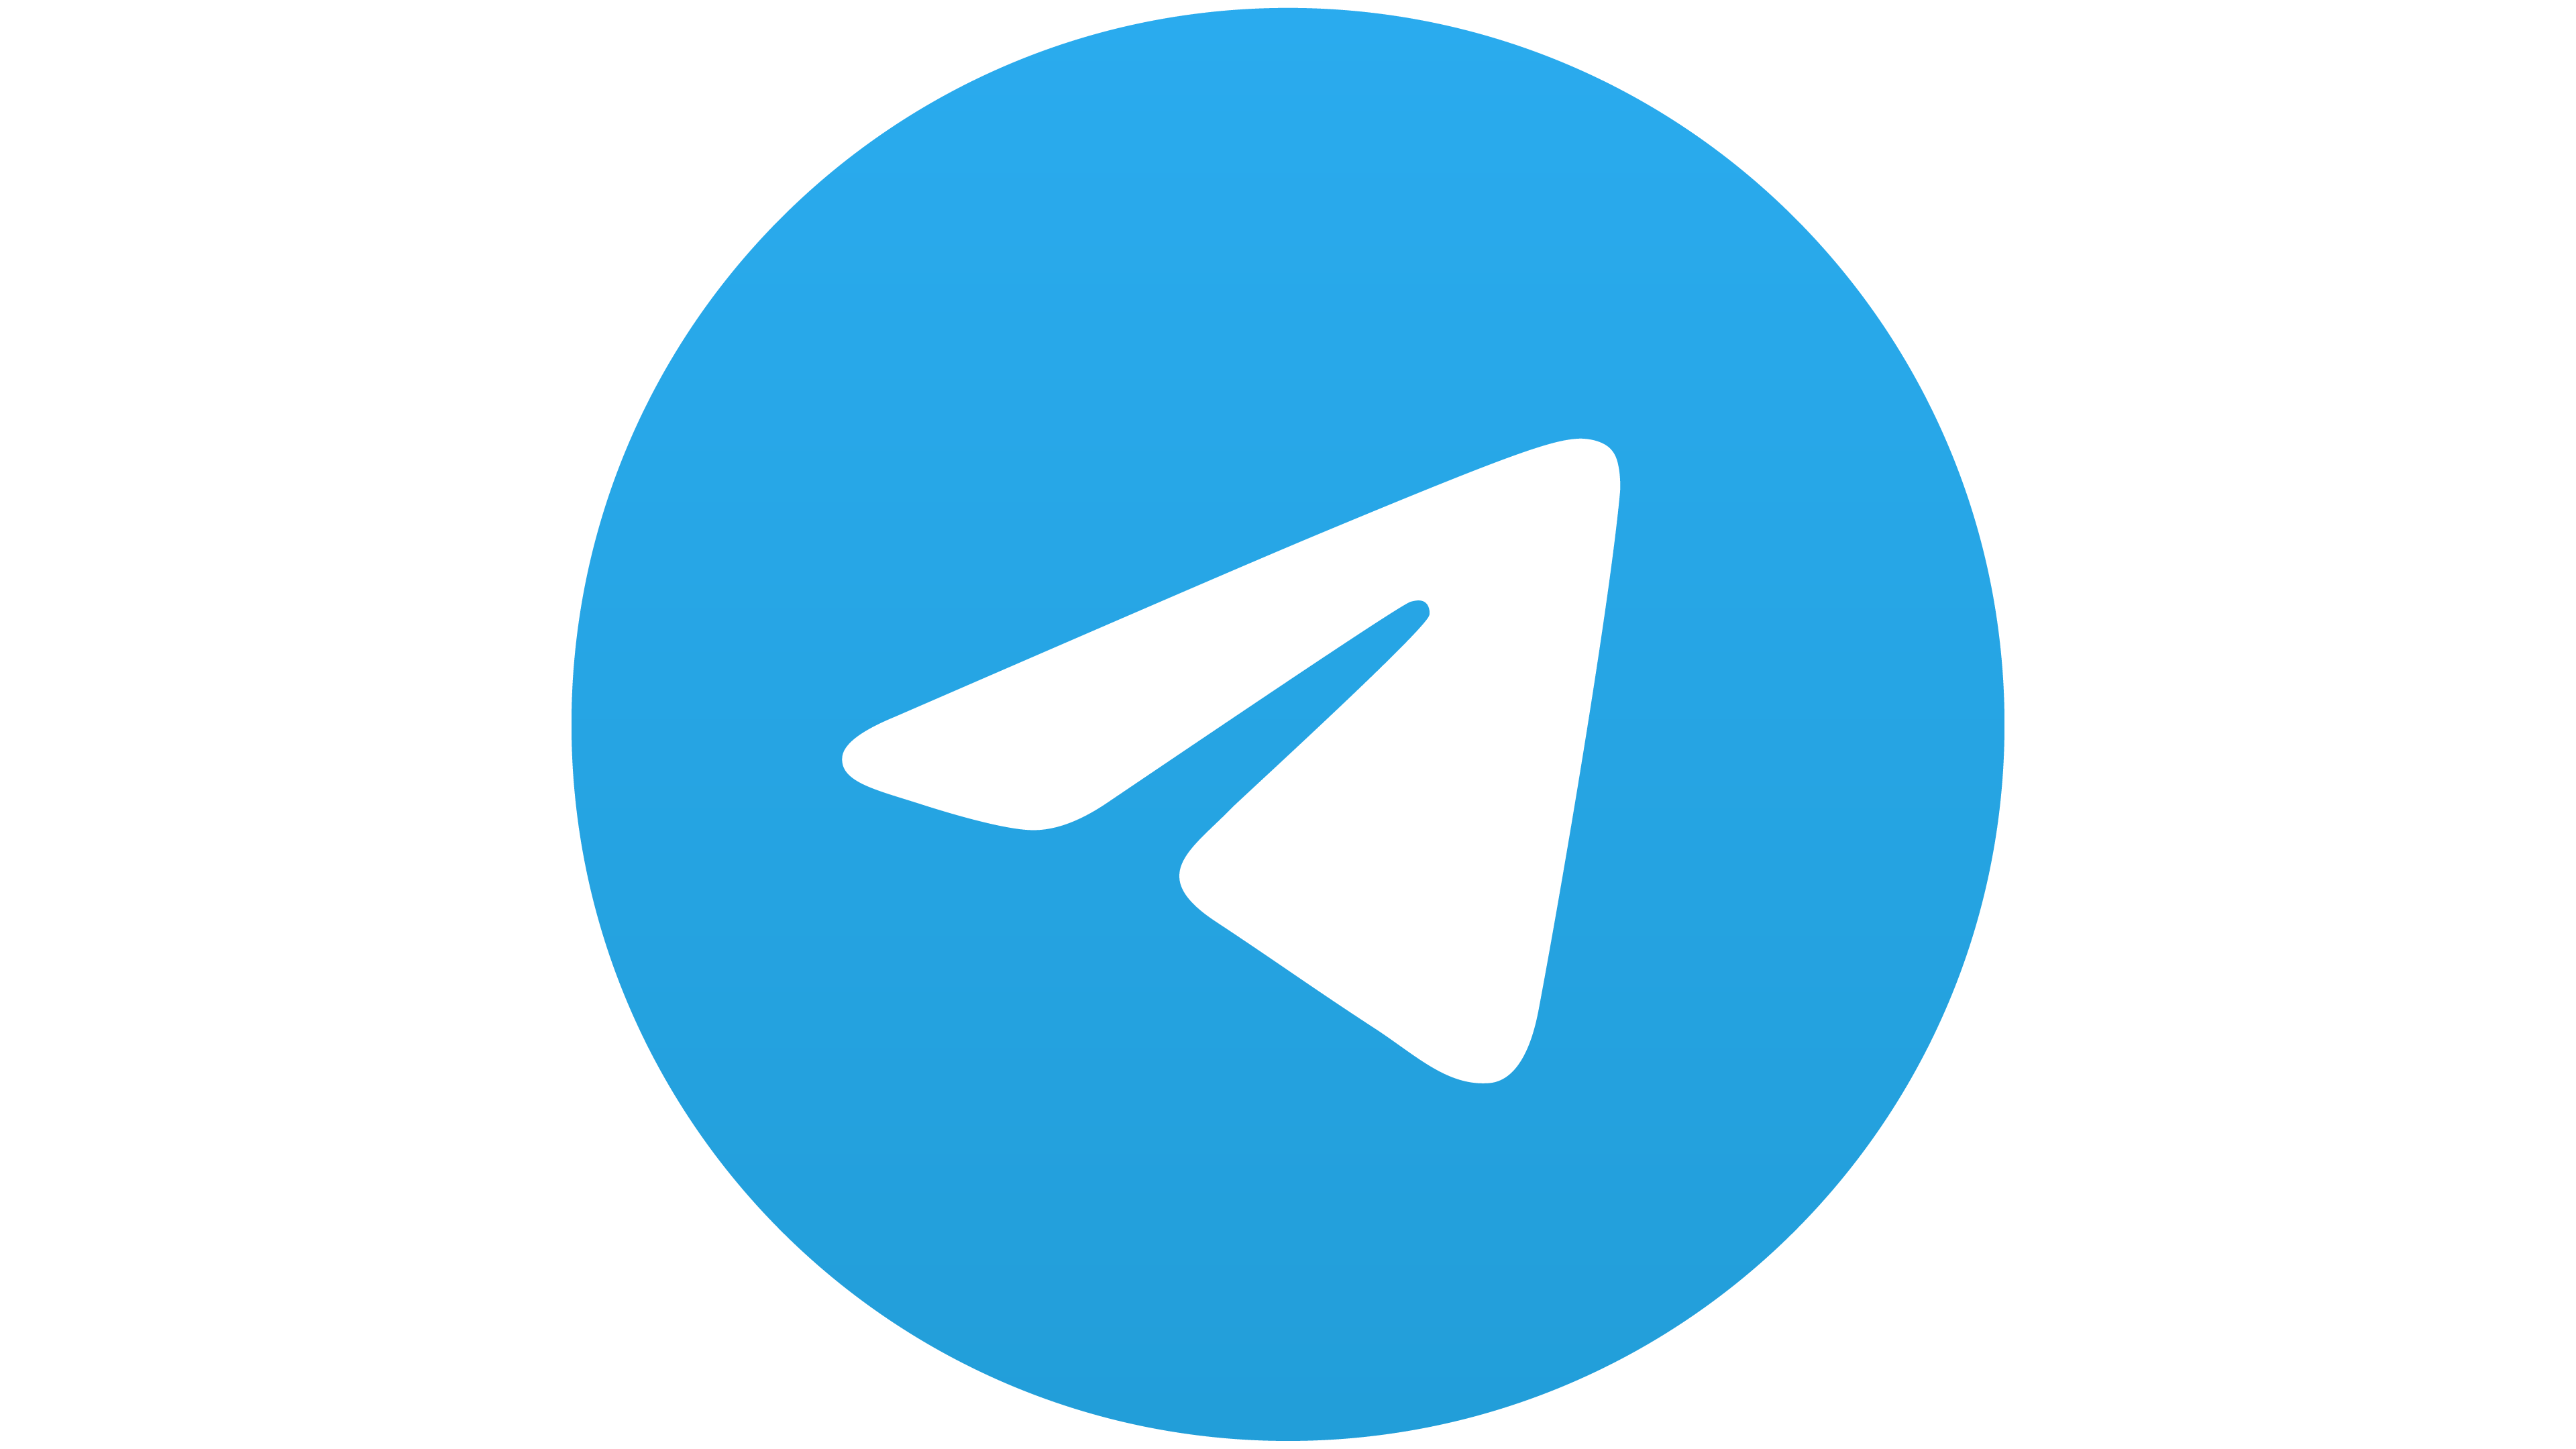 Telegram: A New Channel for Fraud and Cybercrime - StealthMole Intelligence